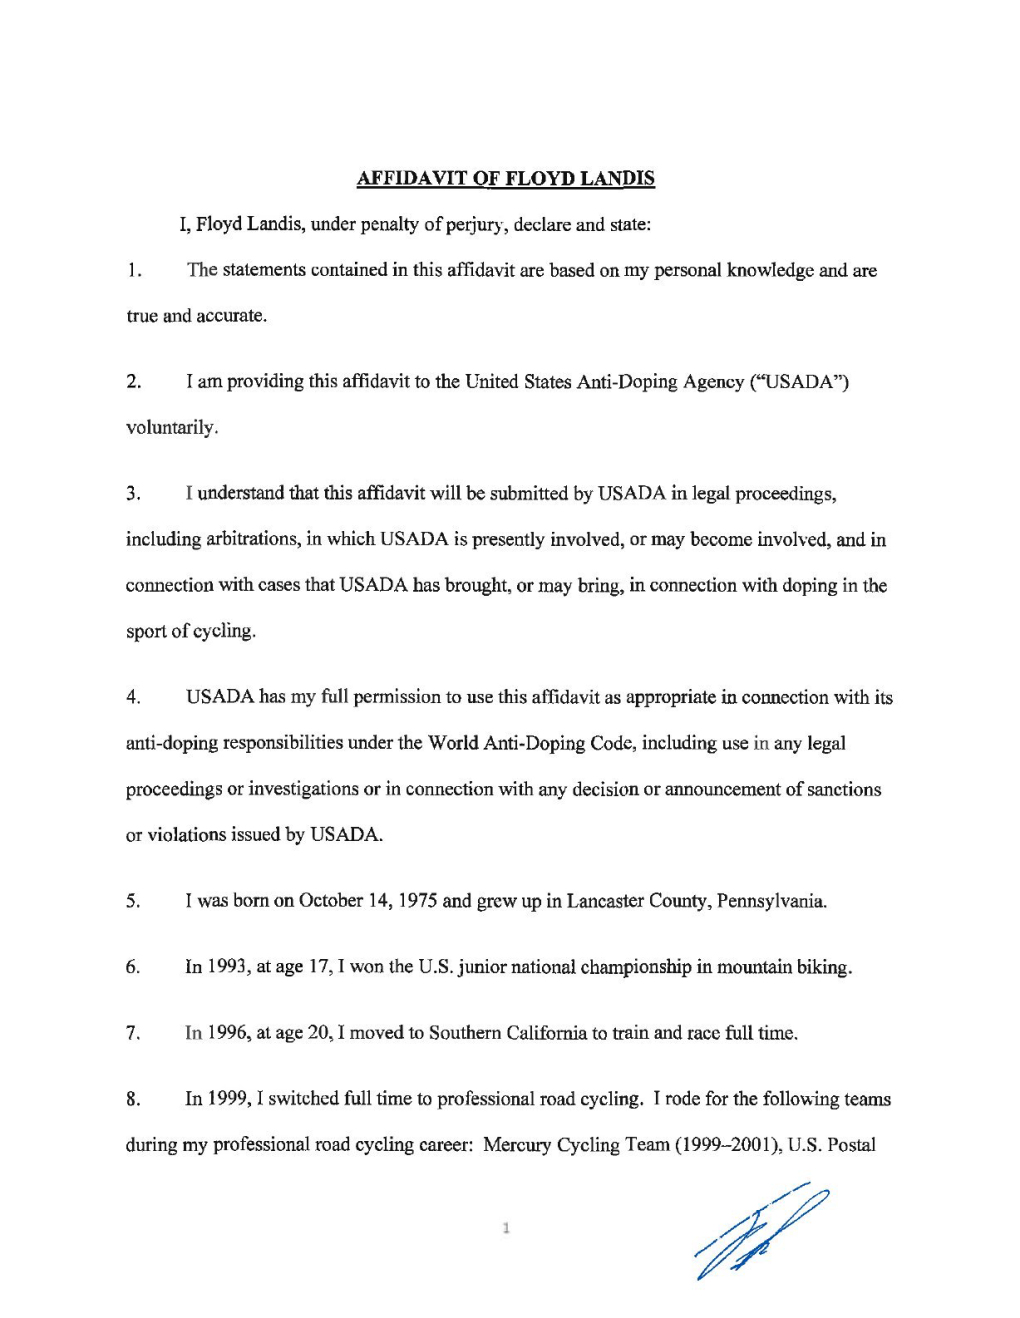 AFFIDAVIT of FLOYD LANDIS I, Floyd Landis, Under Penalty of Perjury, Declare and State: 1. the Statements Contained in This Affi